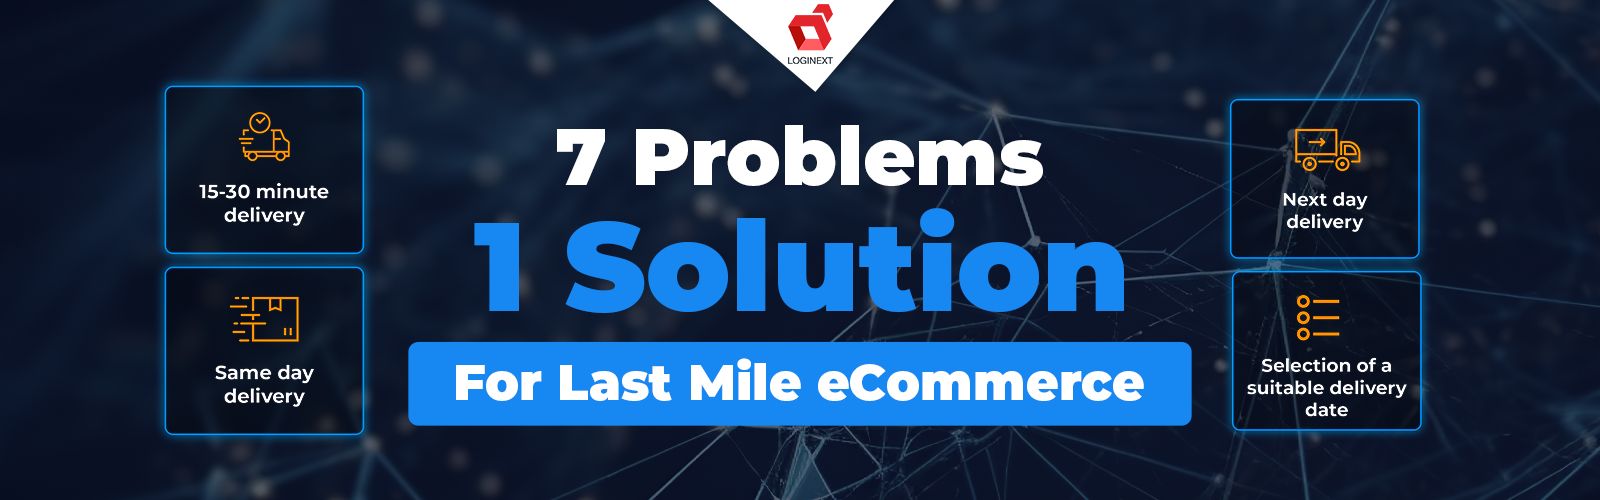 [Infographic] Last-mile eCommerce Delivery Challenges and Solutions